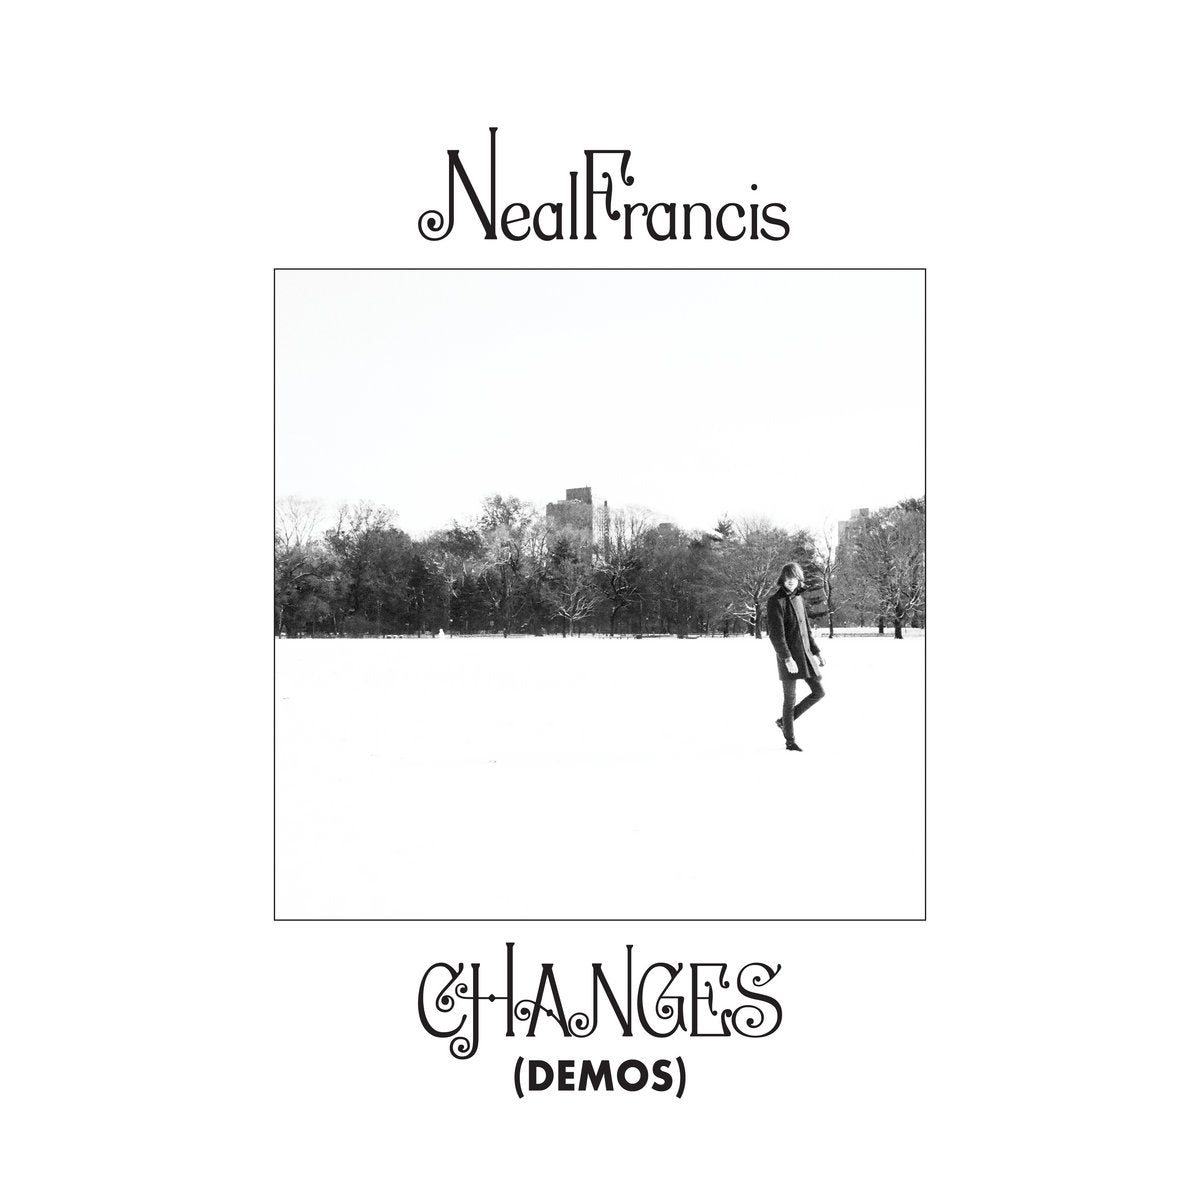 NEAL FRANCIS - Changes (Demos) - 12" E.P. - Limited Vinyl